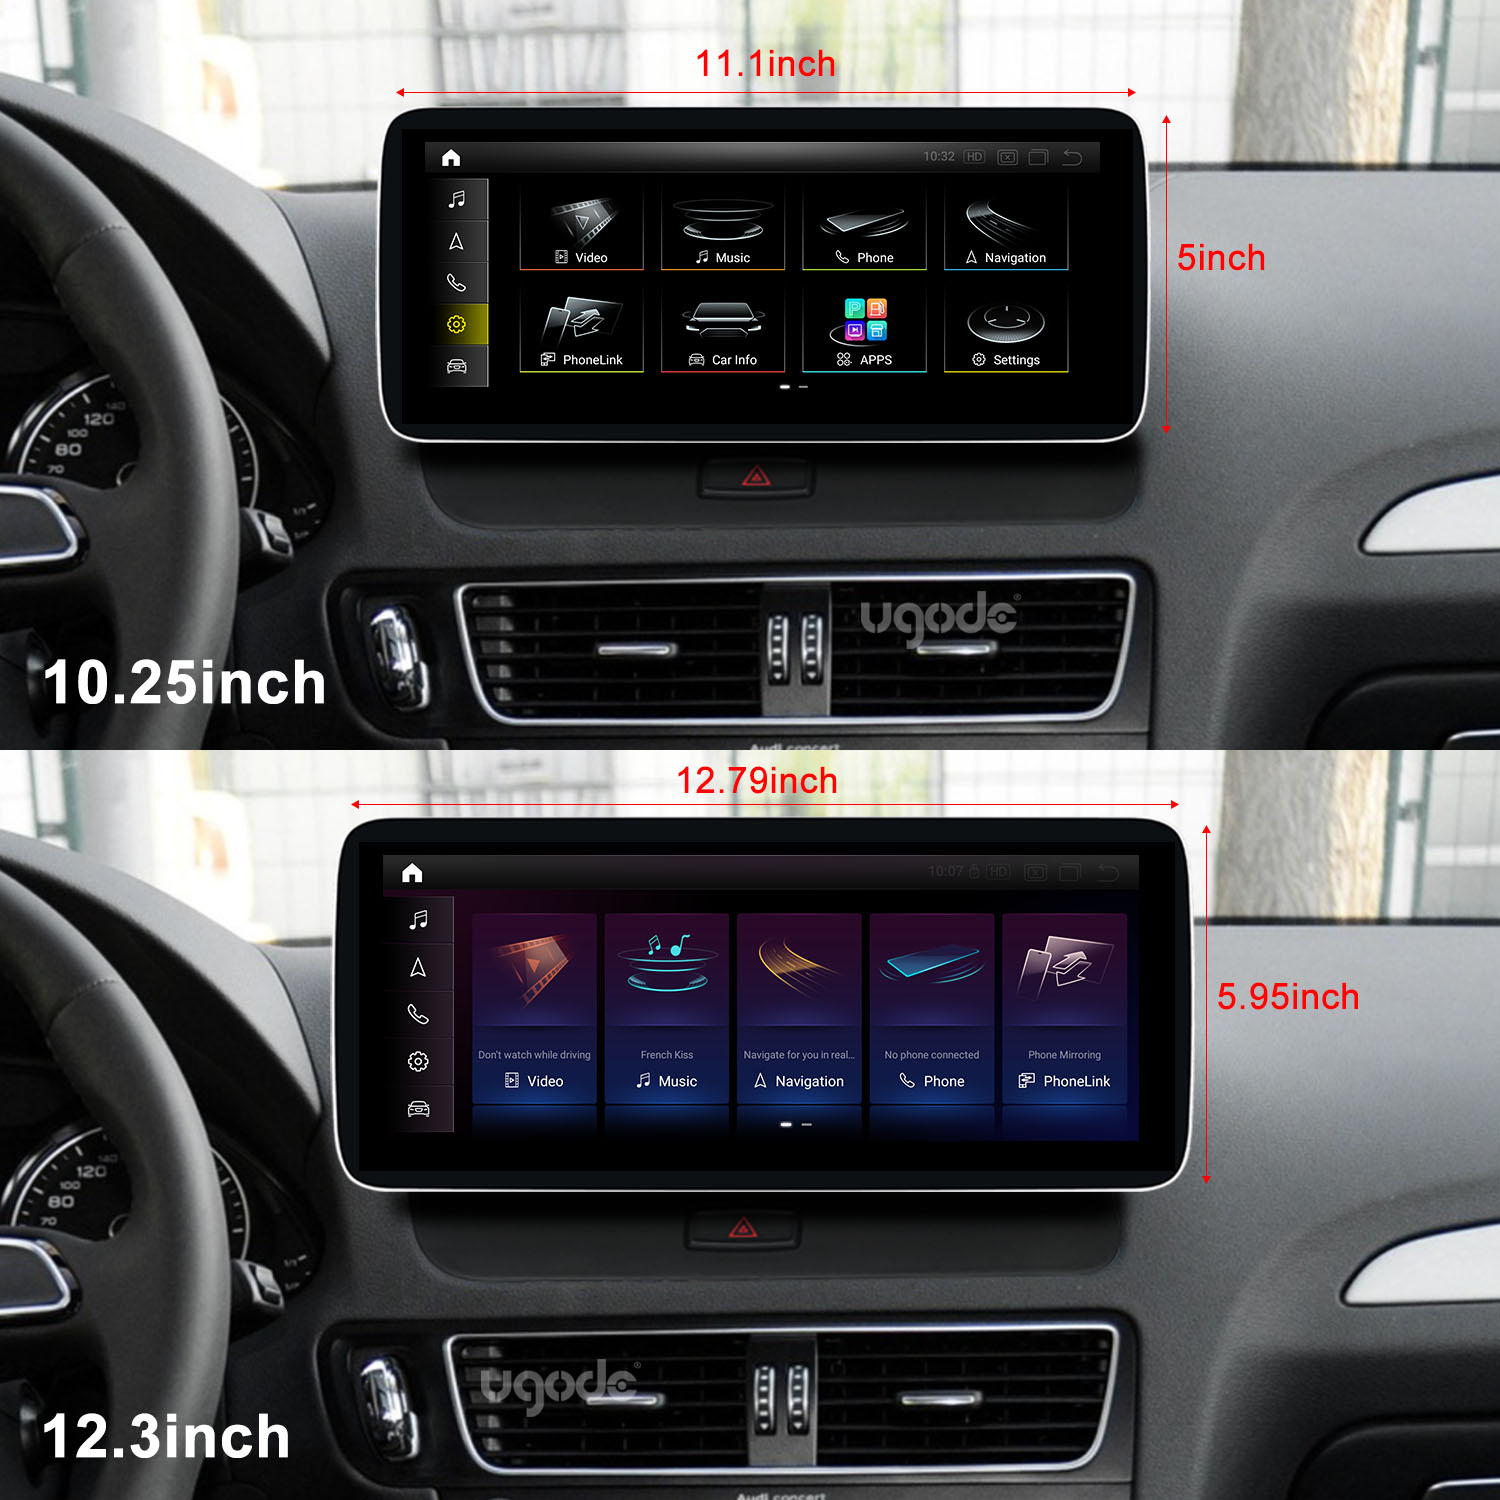 Wit-Up Audi Q5 8R (2009-2015) LHD MMI 12.3 Touchscreen GPS Navi Autor –  Wit-Up CarPlay Android Screen Upgrade